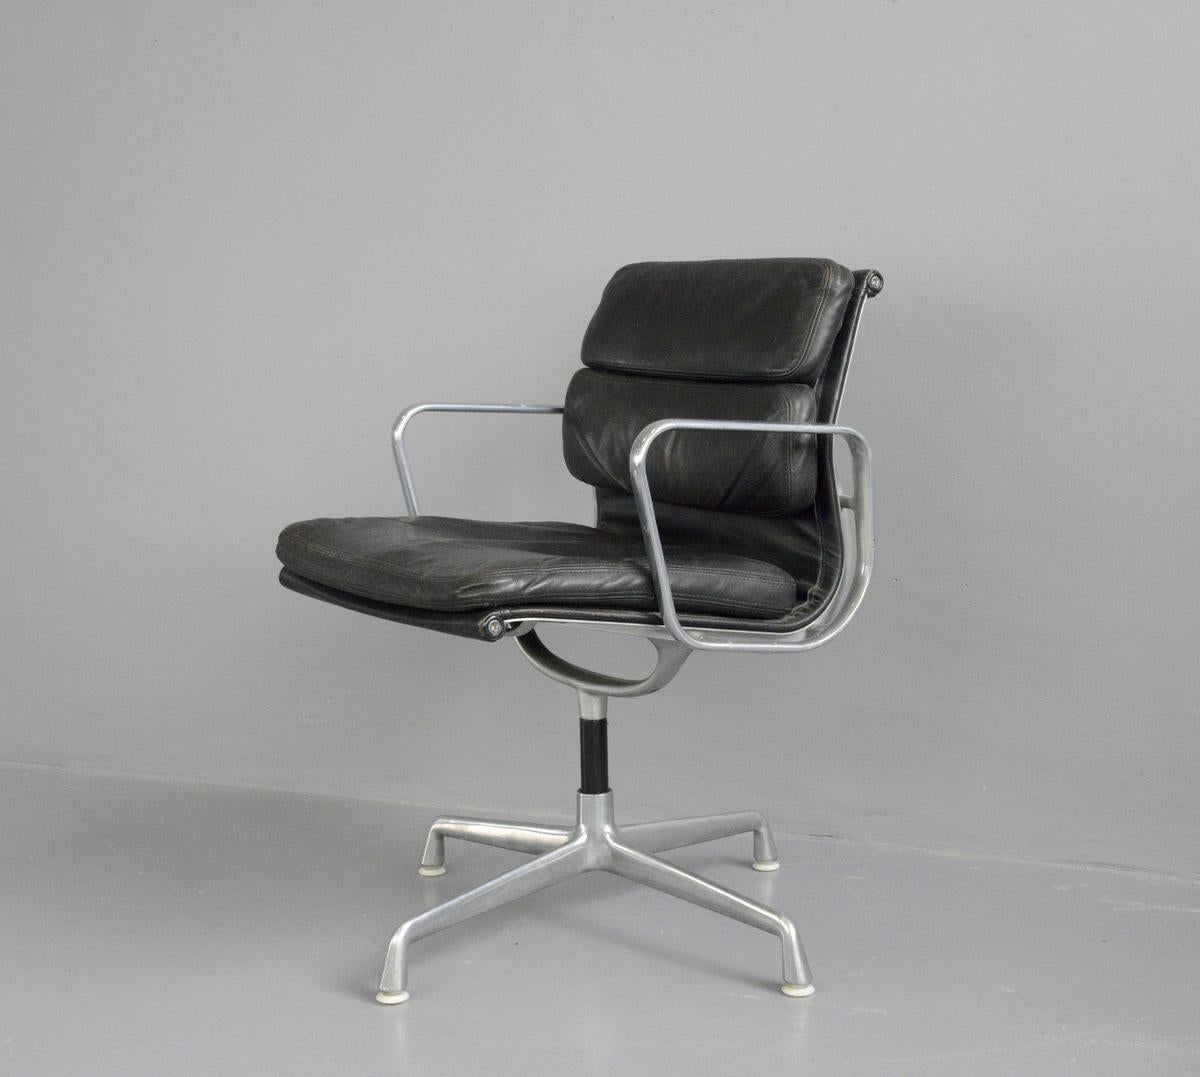 Late 20th Century Desk Chair by Herman Miller circa 1970s